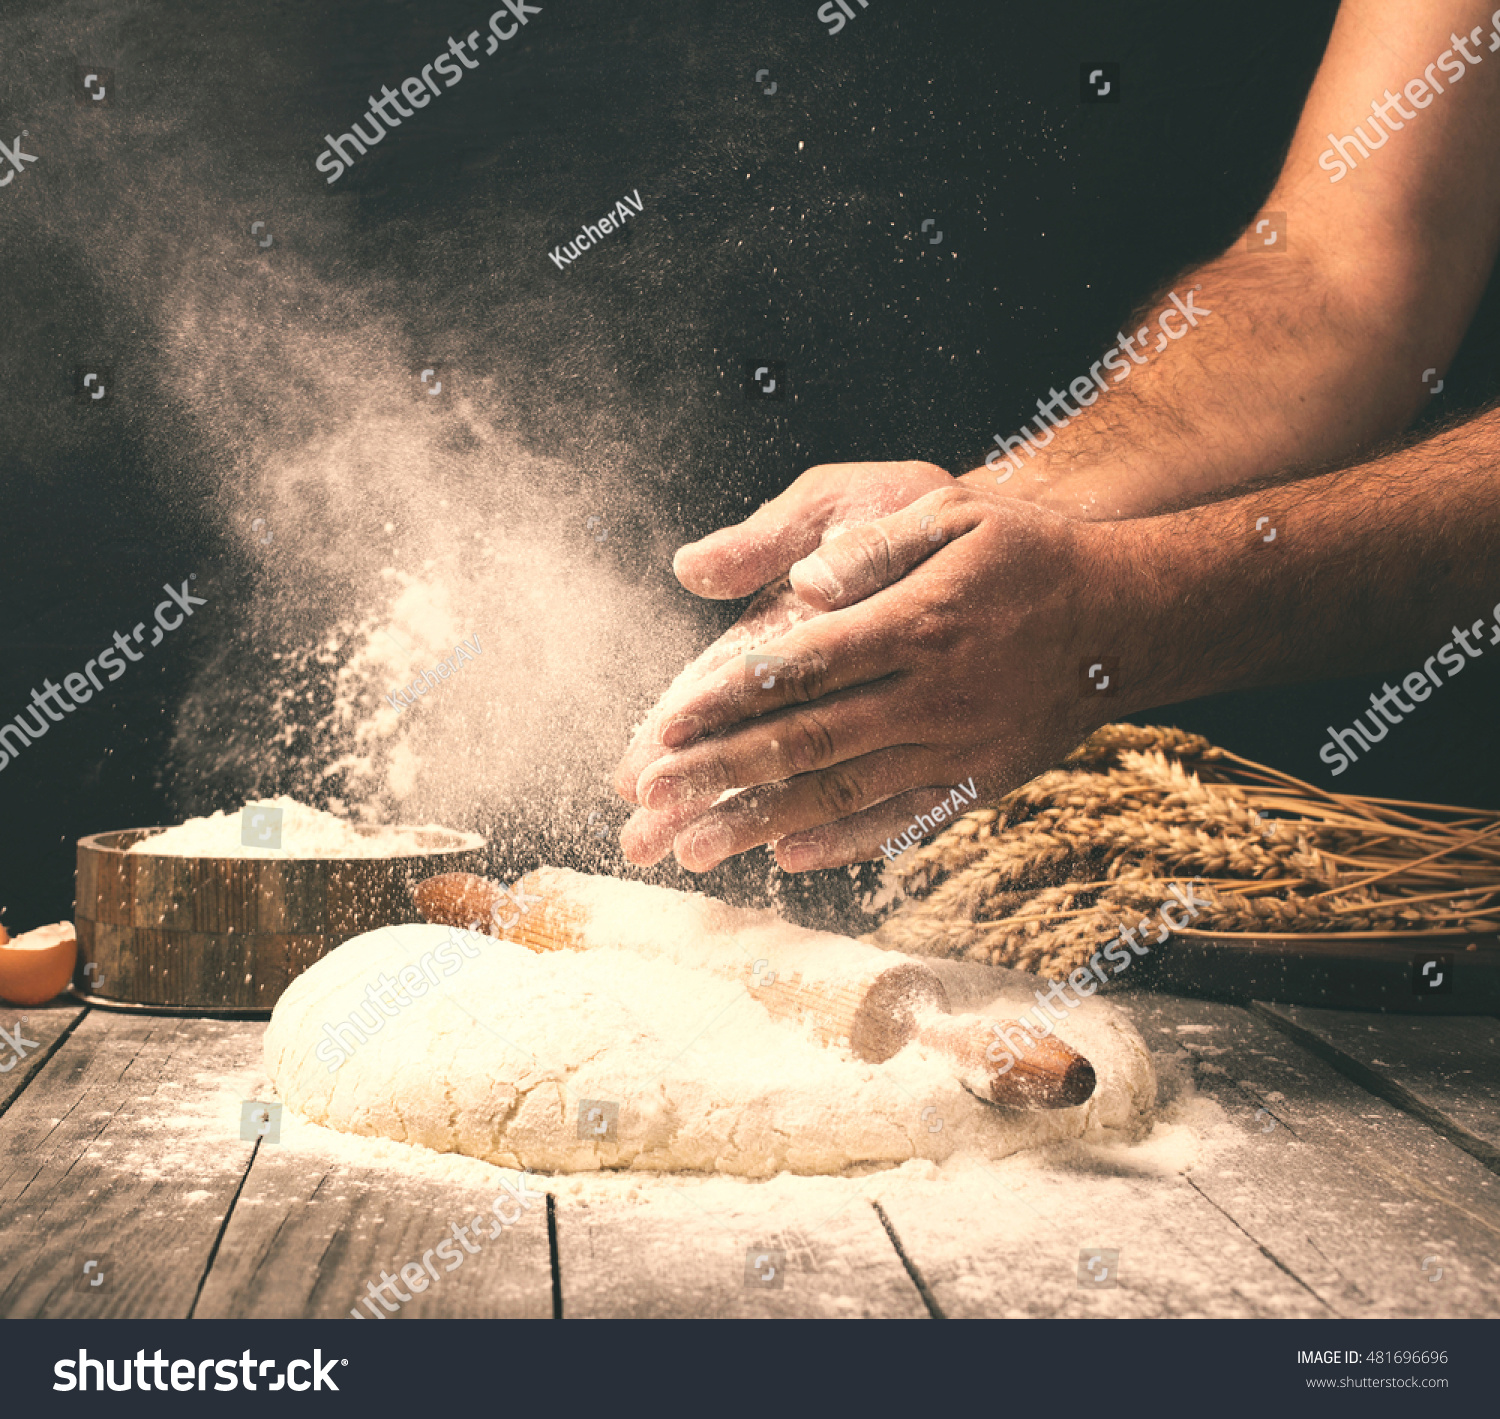 Man preparing bread dough on wooden table in a bakery close up #481696696